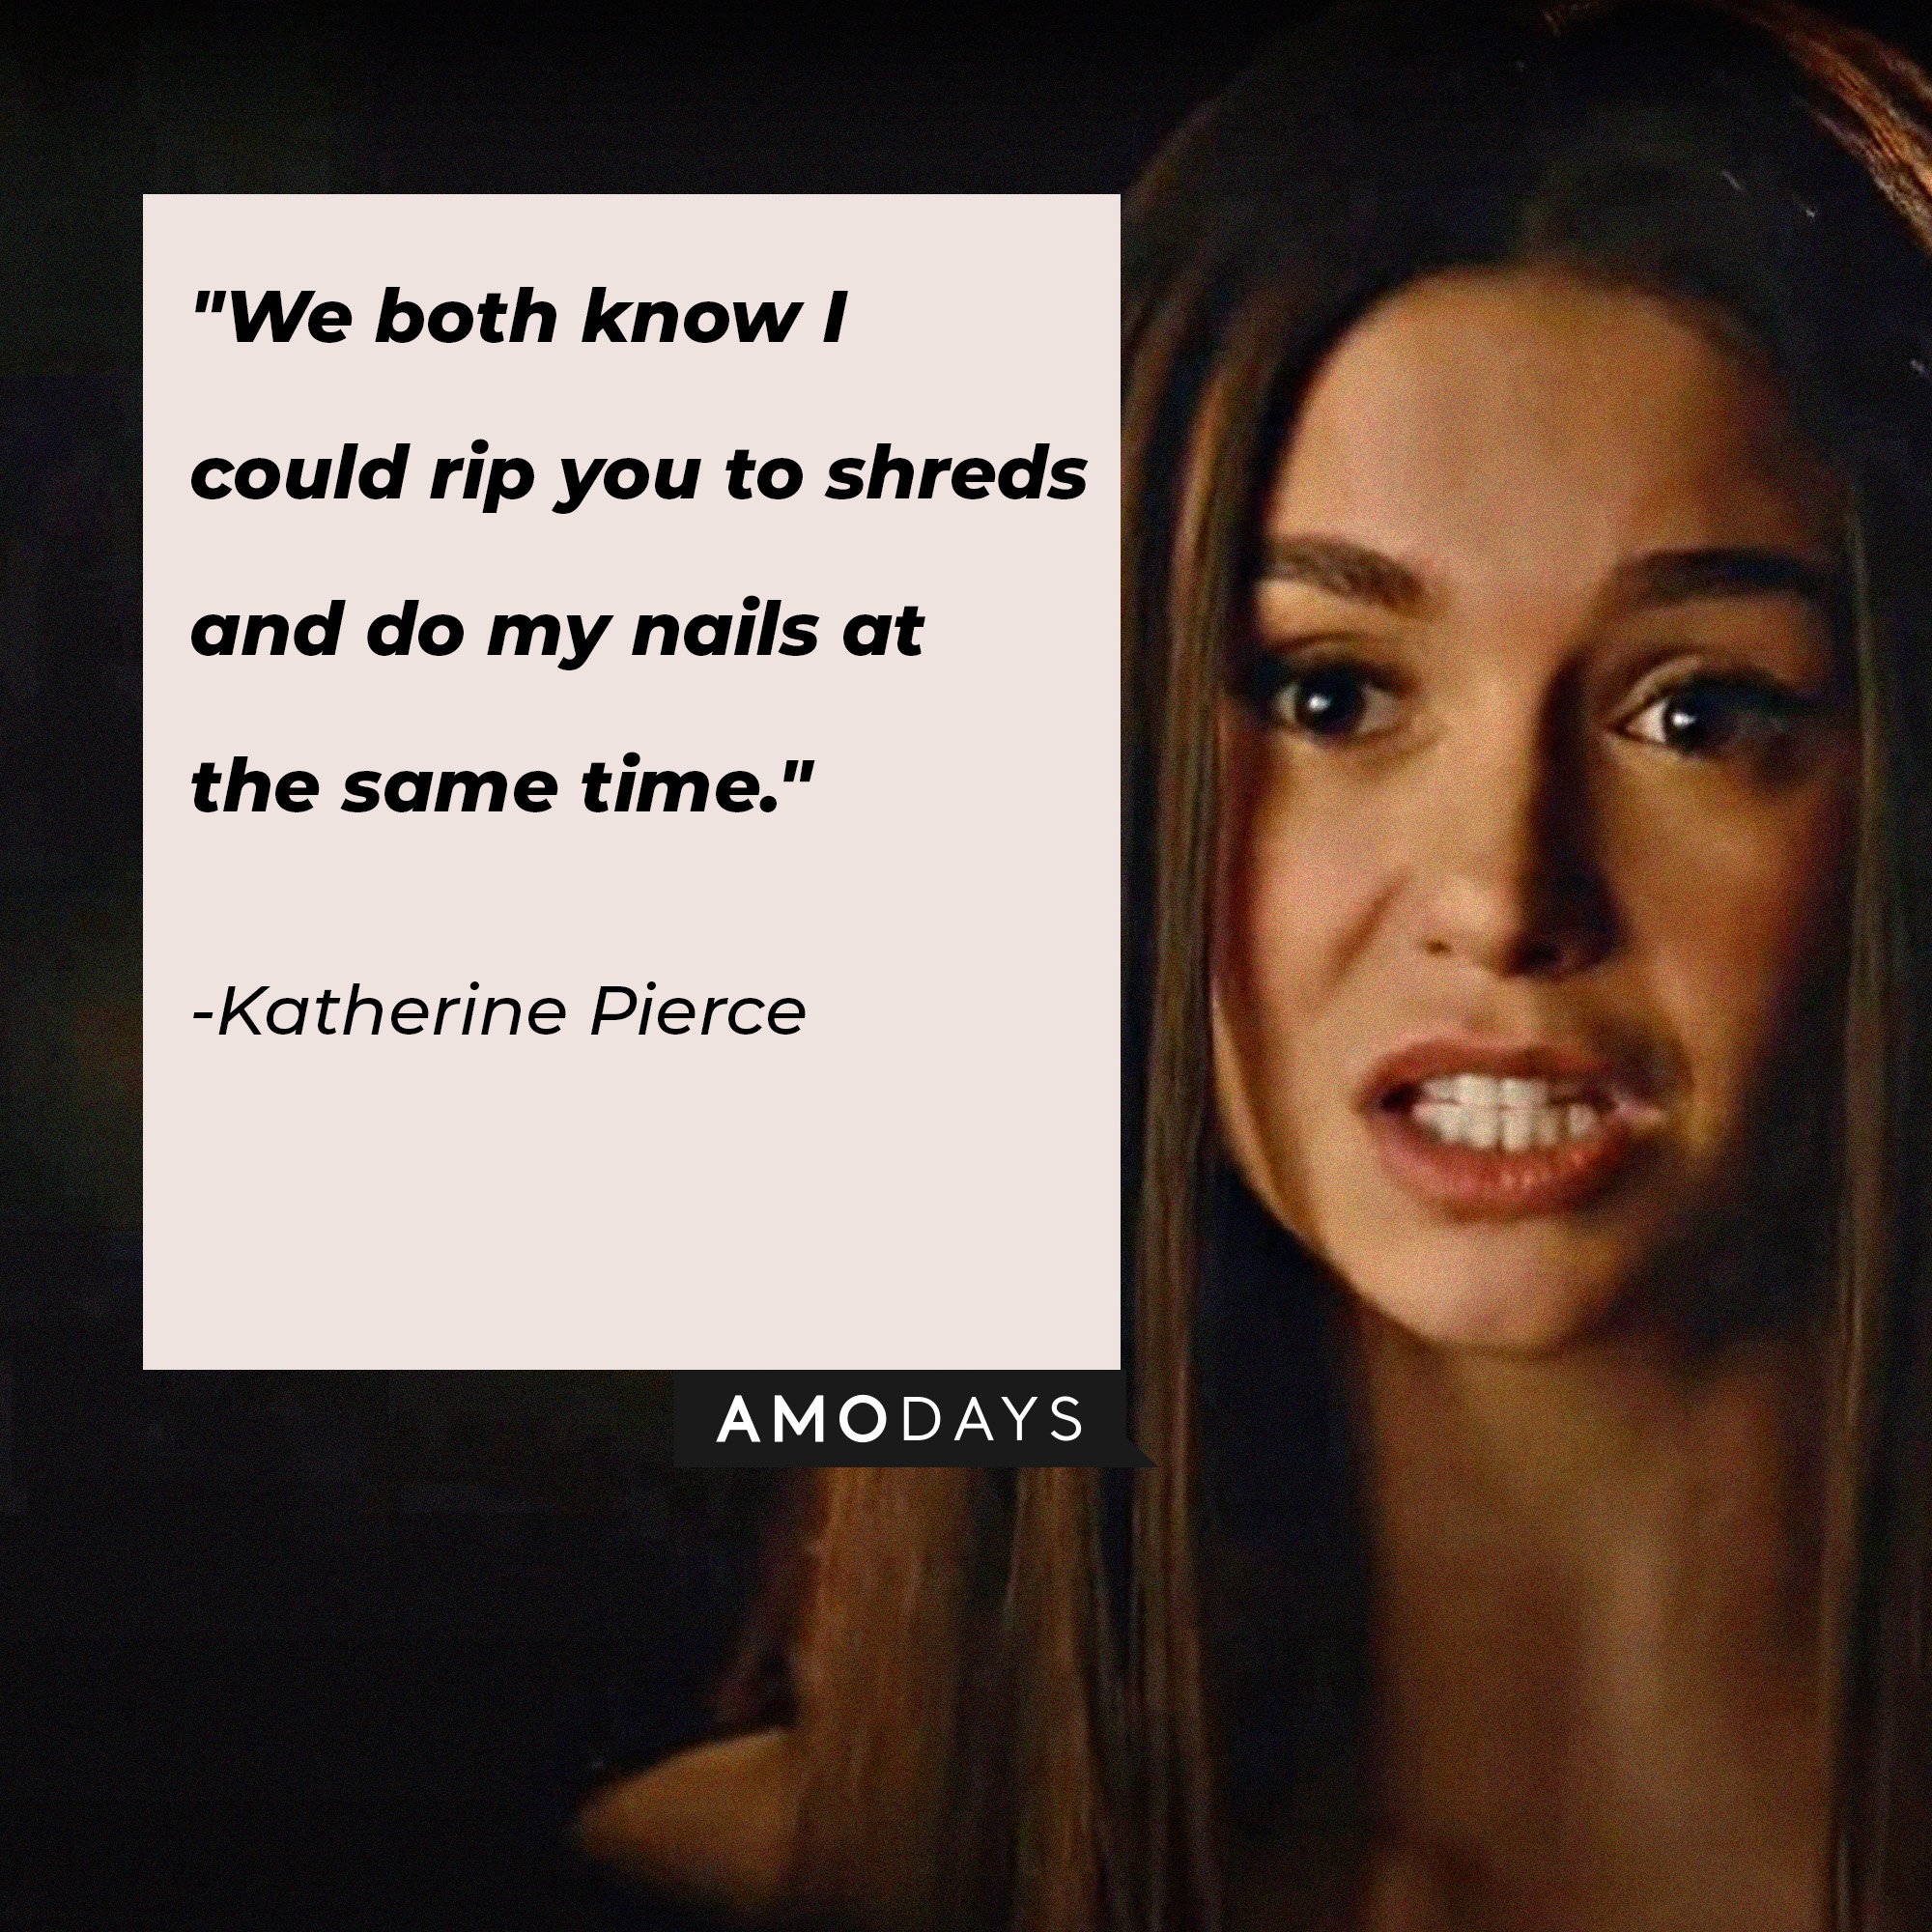 Katherine Pierce's quote: "We both know I could rip you to shreds and do my nails at the same time." | Image: AmoDays